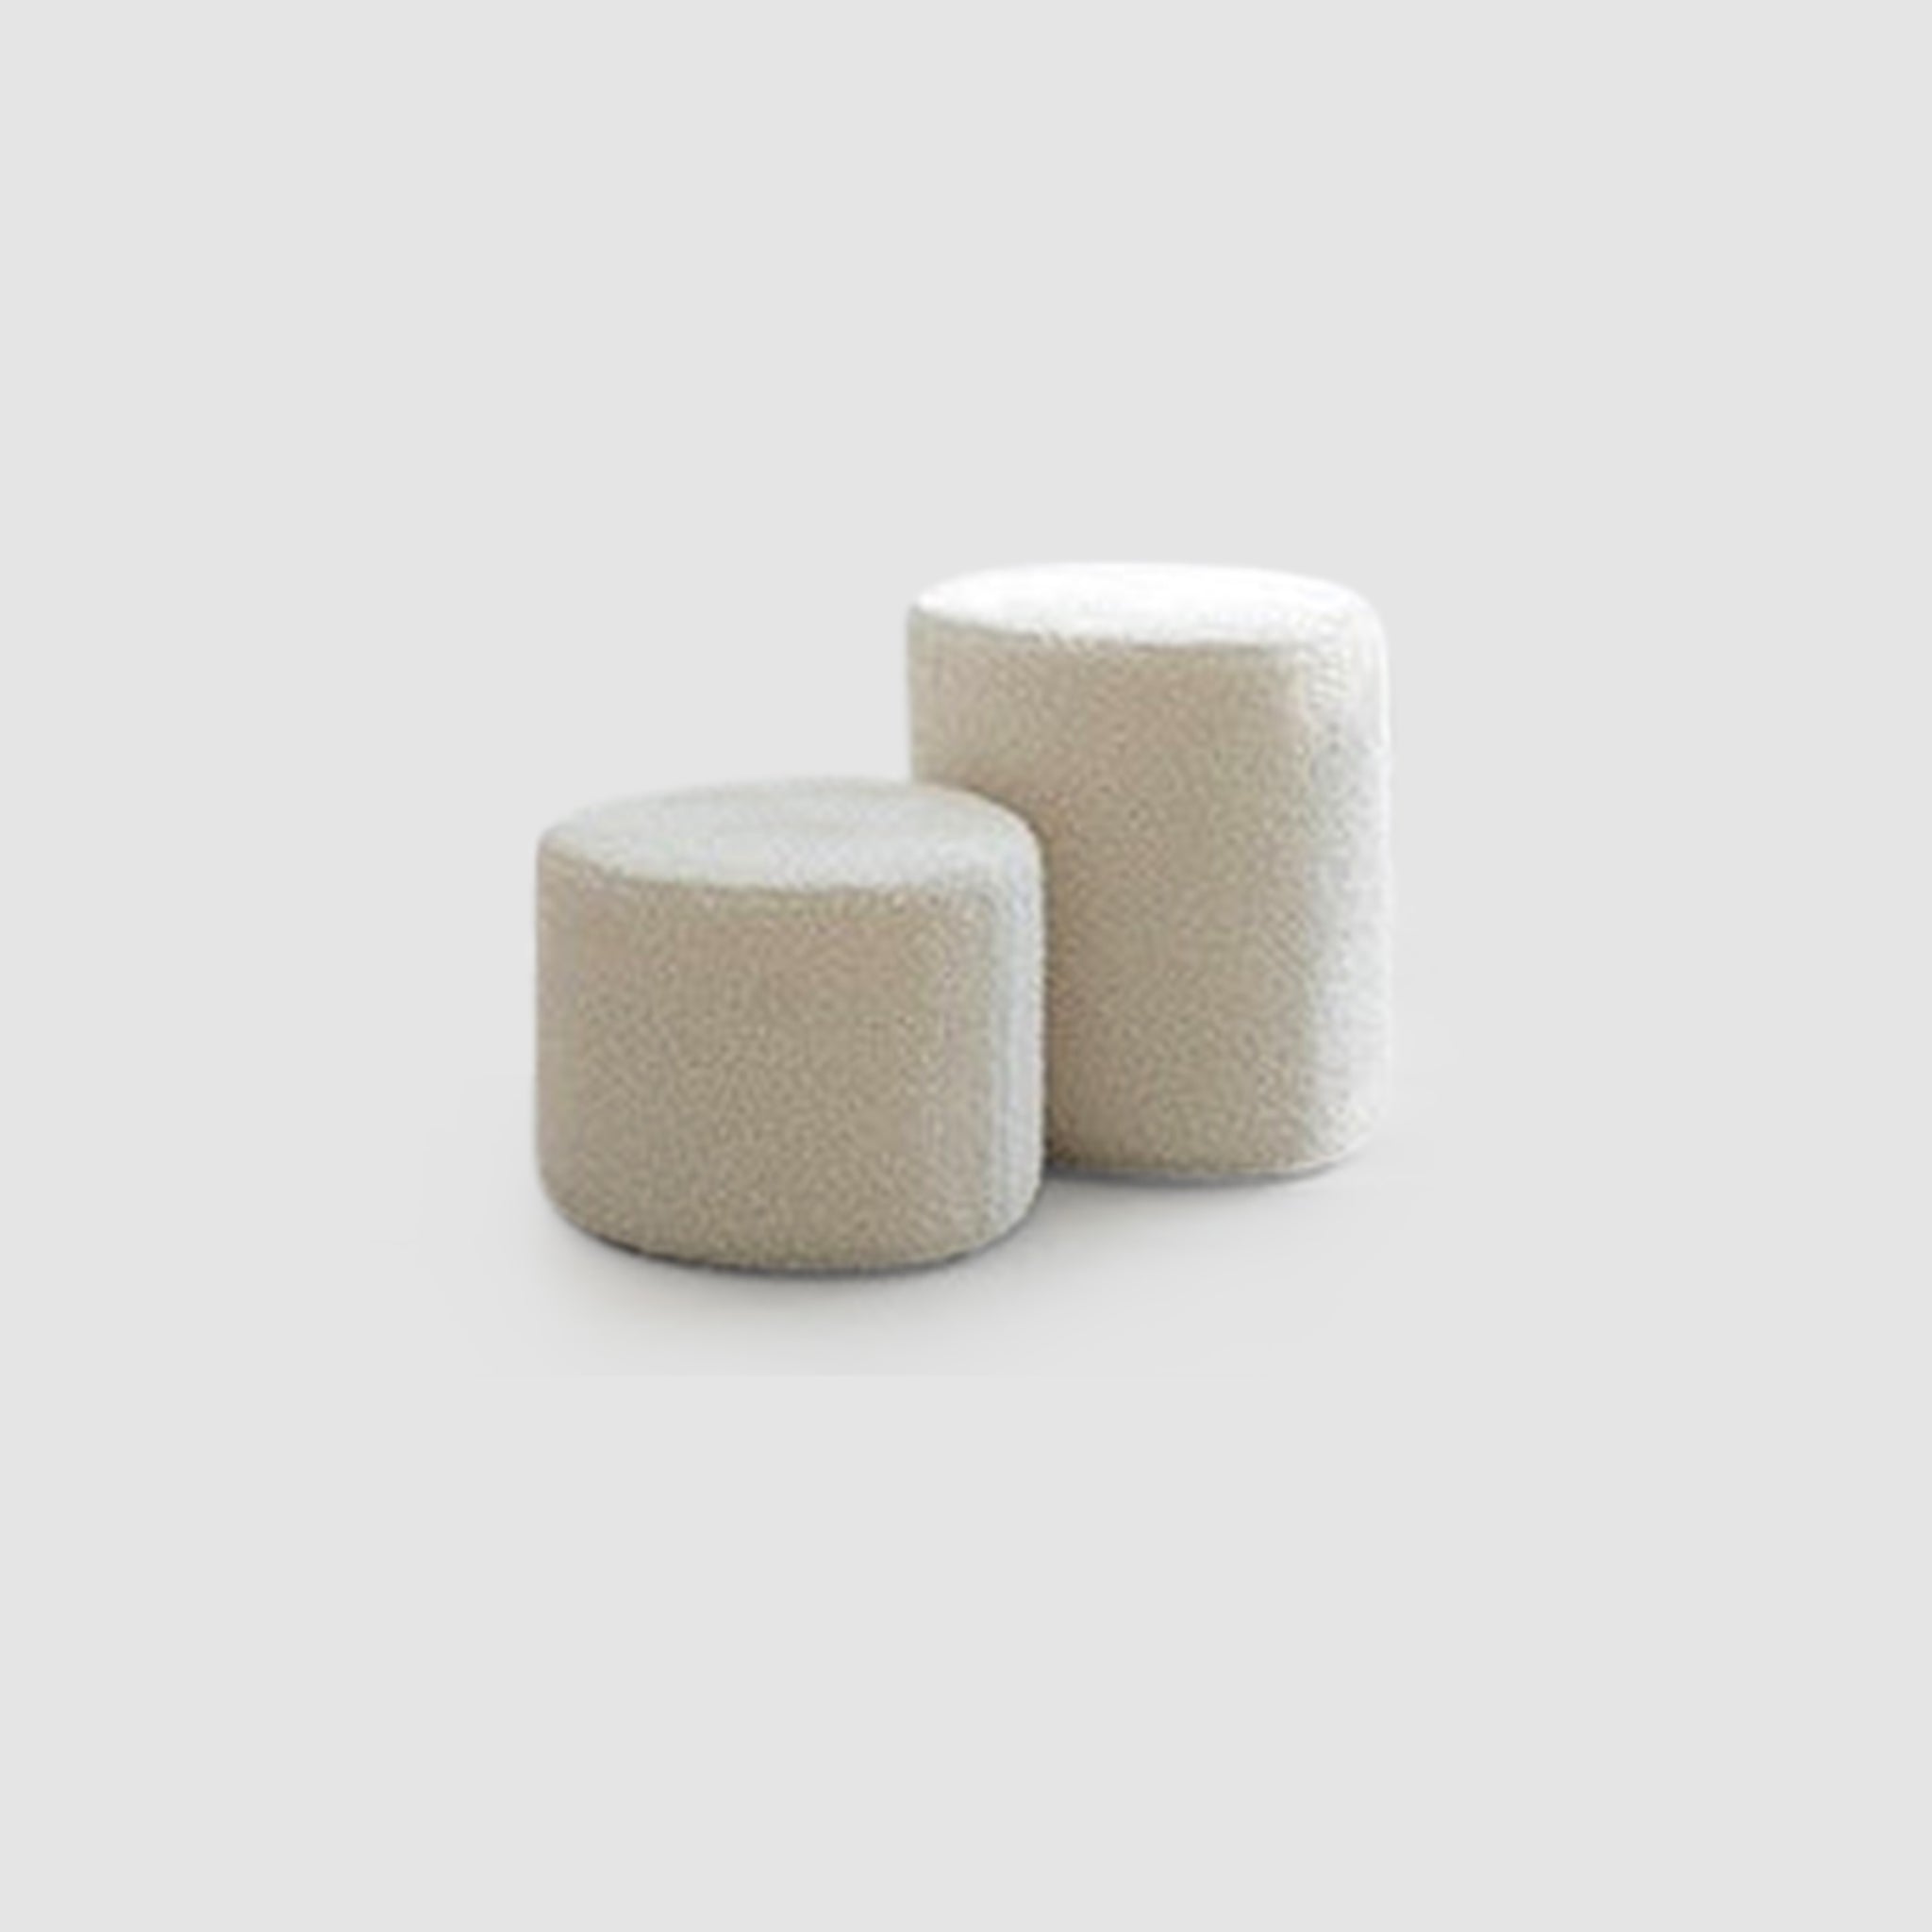 Two stacked white ottomans on a white background